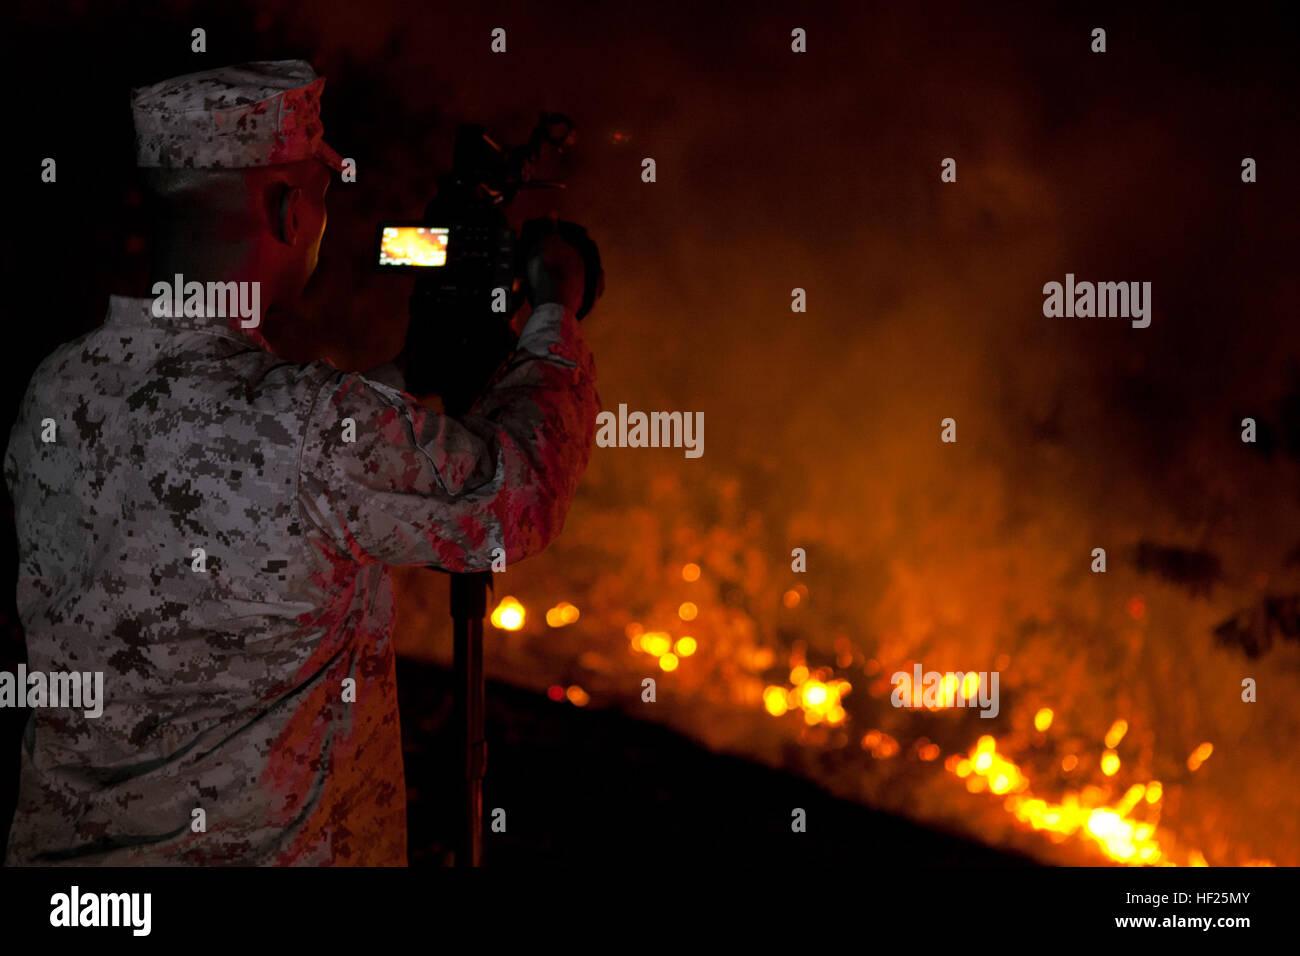 U.S. Marine Sgt William Lewis, a Combat Camera Videographer with Headquarters and Support Battalion, Marine Corps Installations West-Marine Corps Base Camp Pendleton, records the Las Pulgas Fire as it burns near the 32 Area at Camp Pendleton, Calif., 15 May, 2014. The Las Pulgas Wildfire on Camp Pendleton has burned more than 15,000 acres and is the largest fire in San Diego County history. (U.S. Marine Corps photo by Sgt. Ethan Johnson/MCIW-MCB CamPen COMCAM/Released) Camp Pendleton Fires 140515-M-HU778-022 Stock Photo